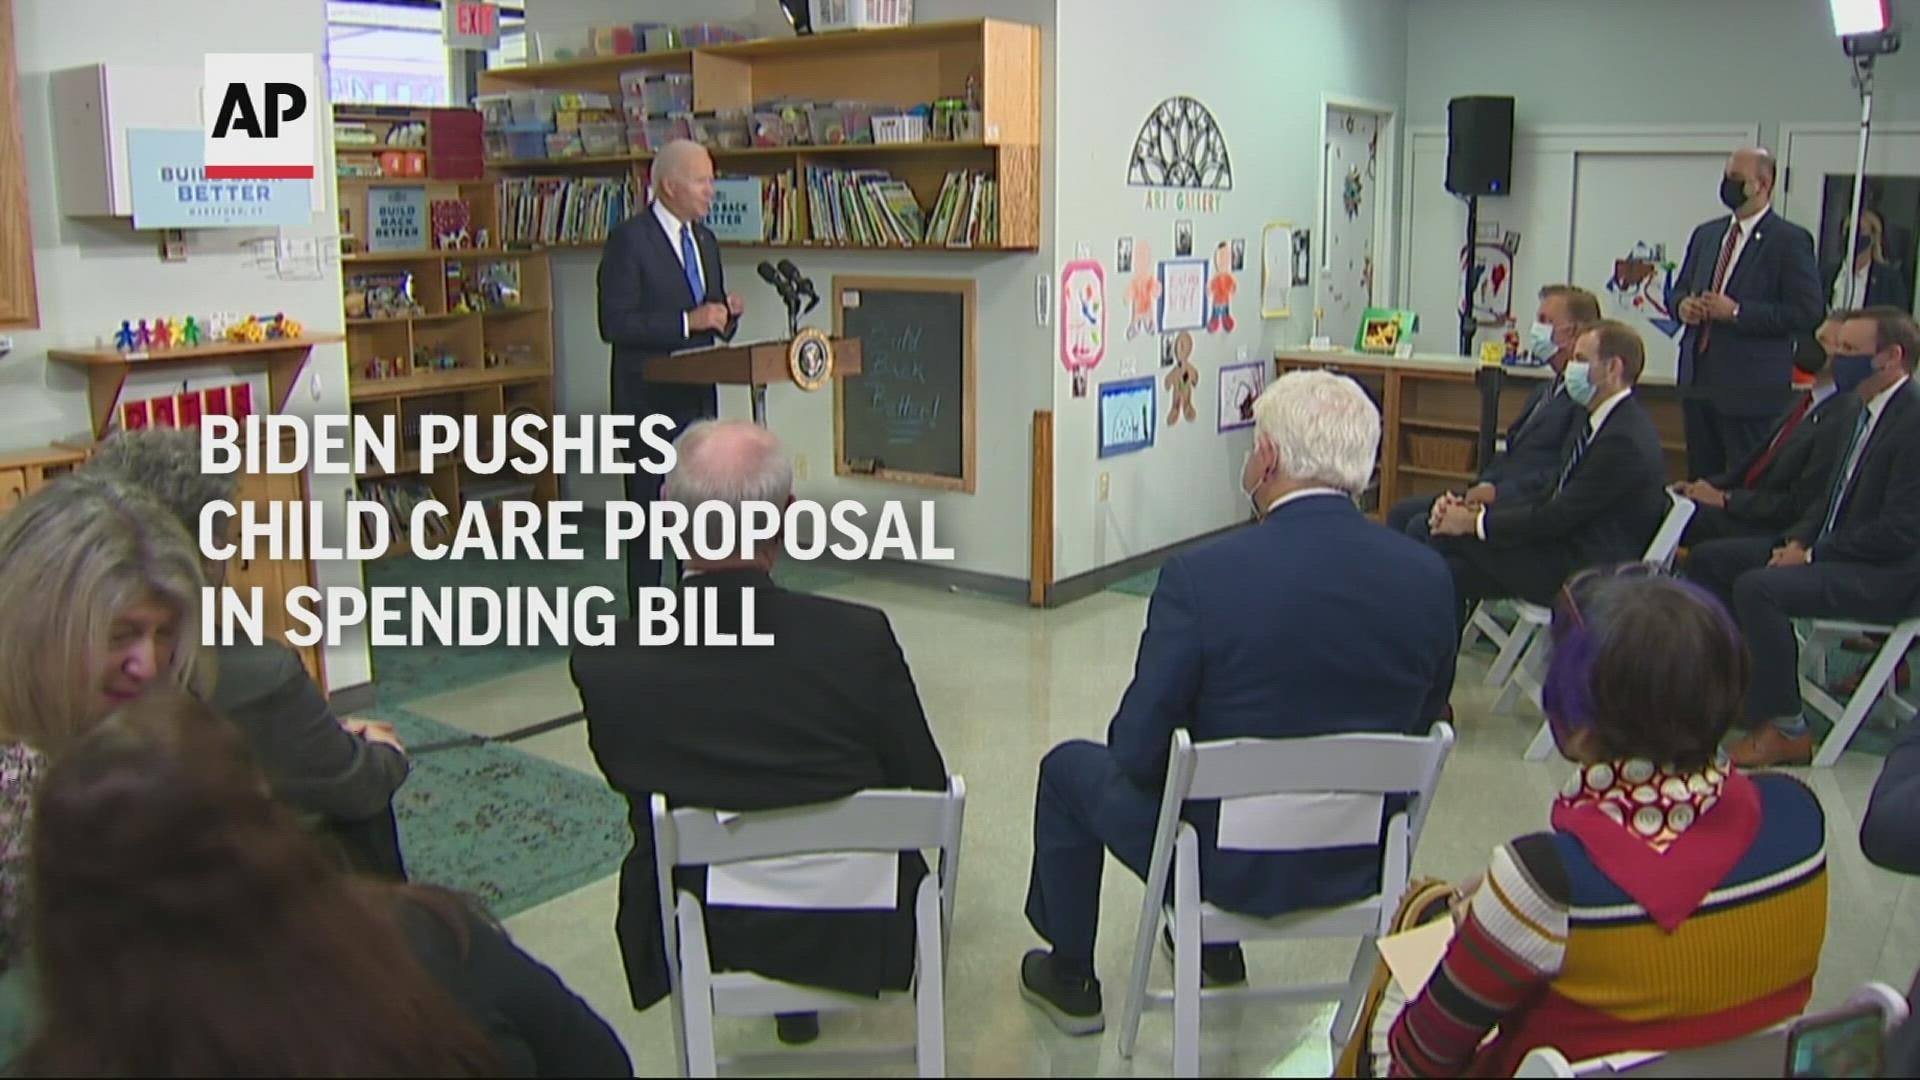 U.S. President Joe Biden visited a child care center in Connecticut Friday, to argue for investments in child care and other social safety net programs.